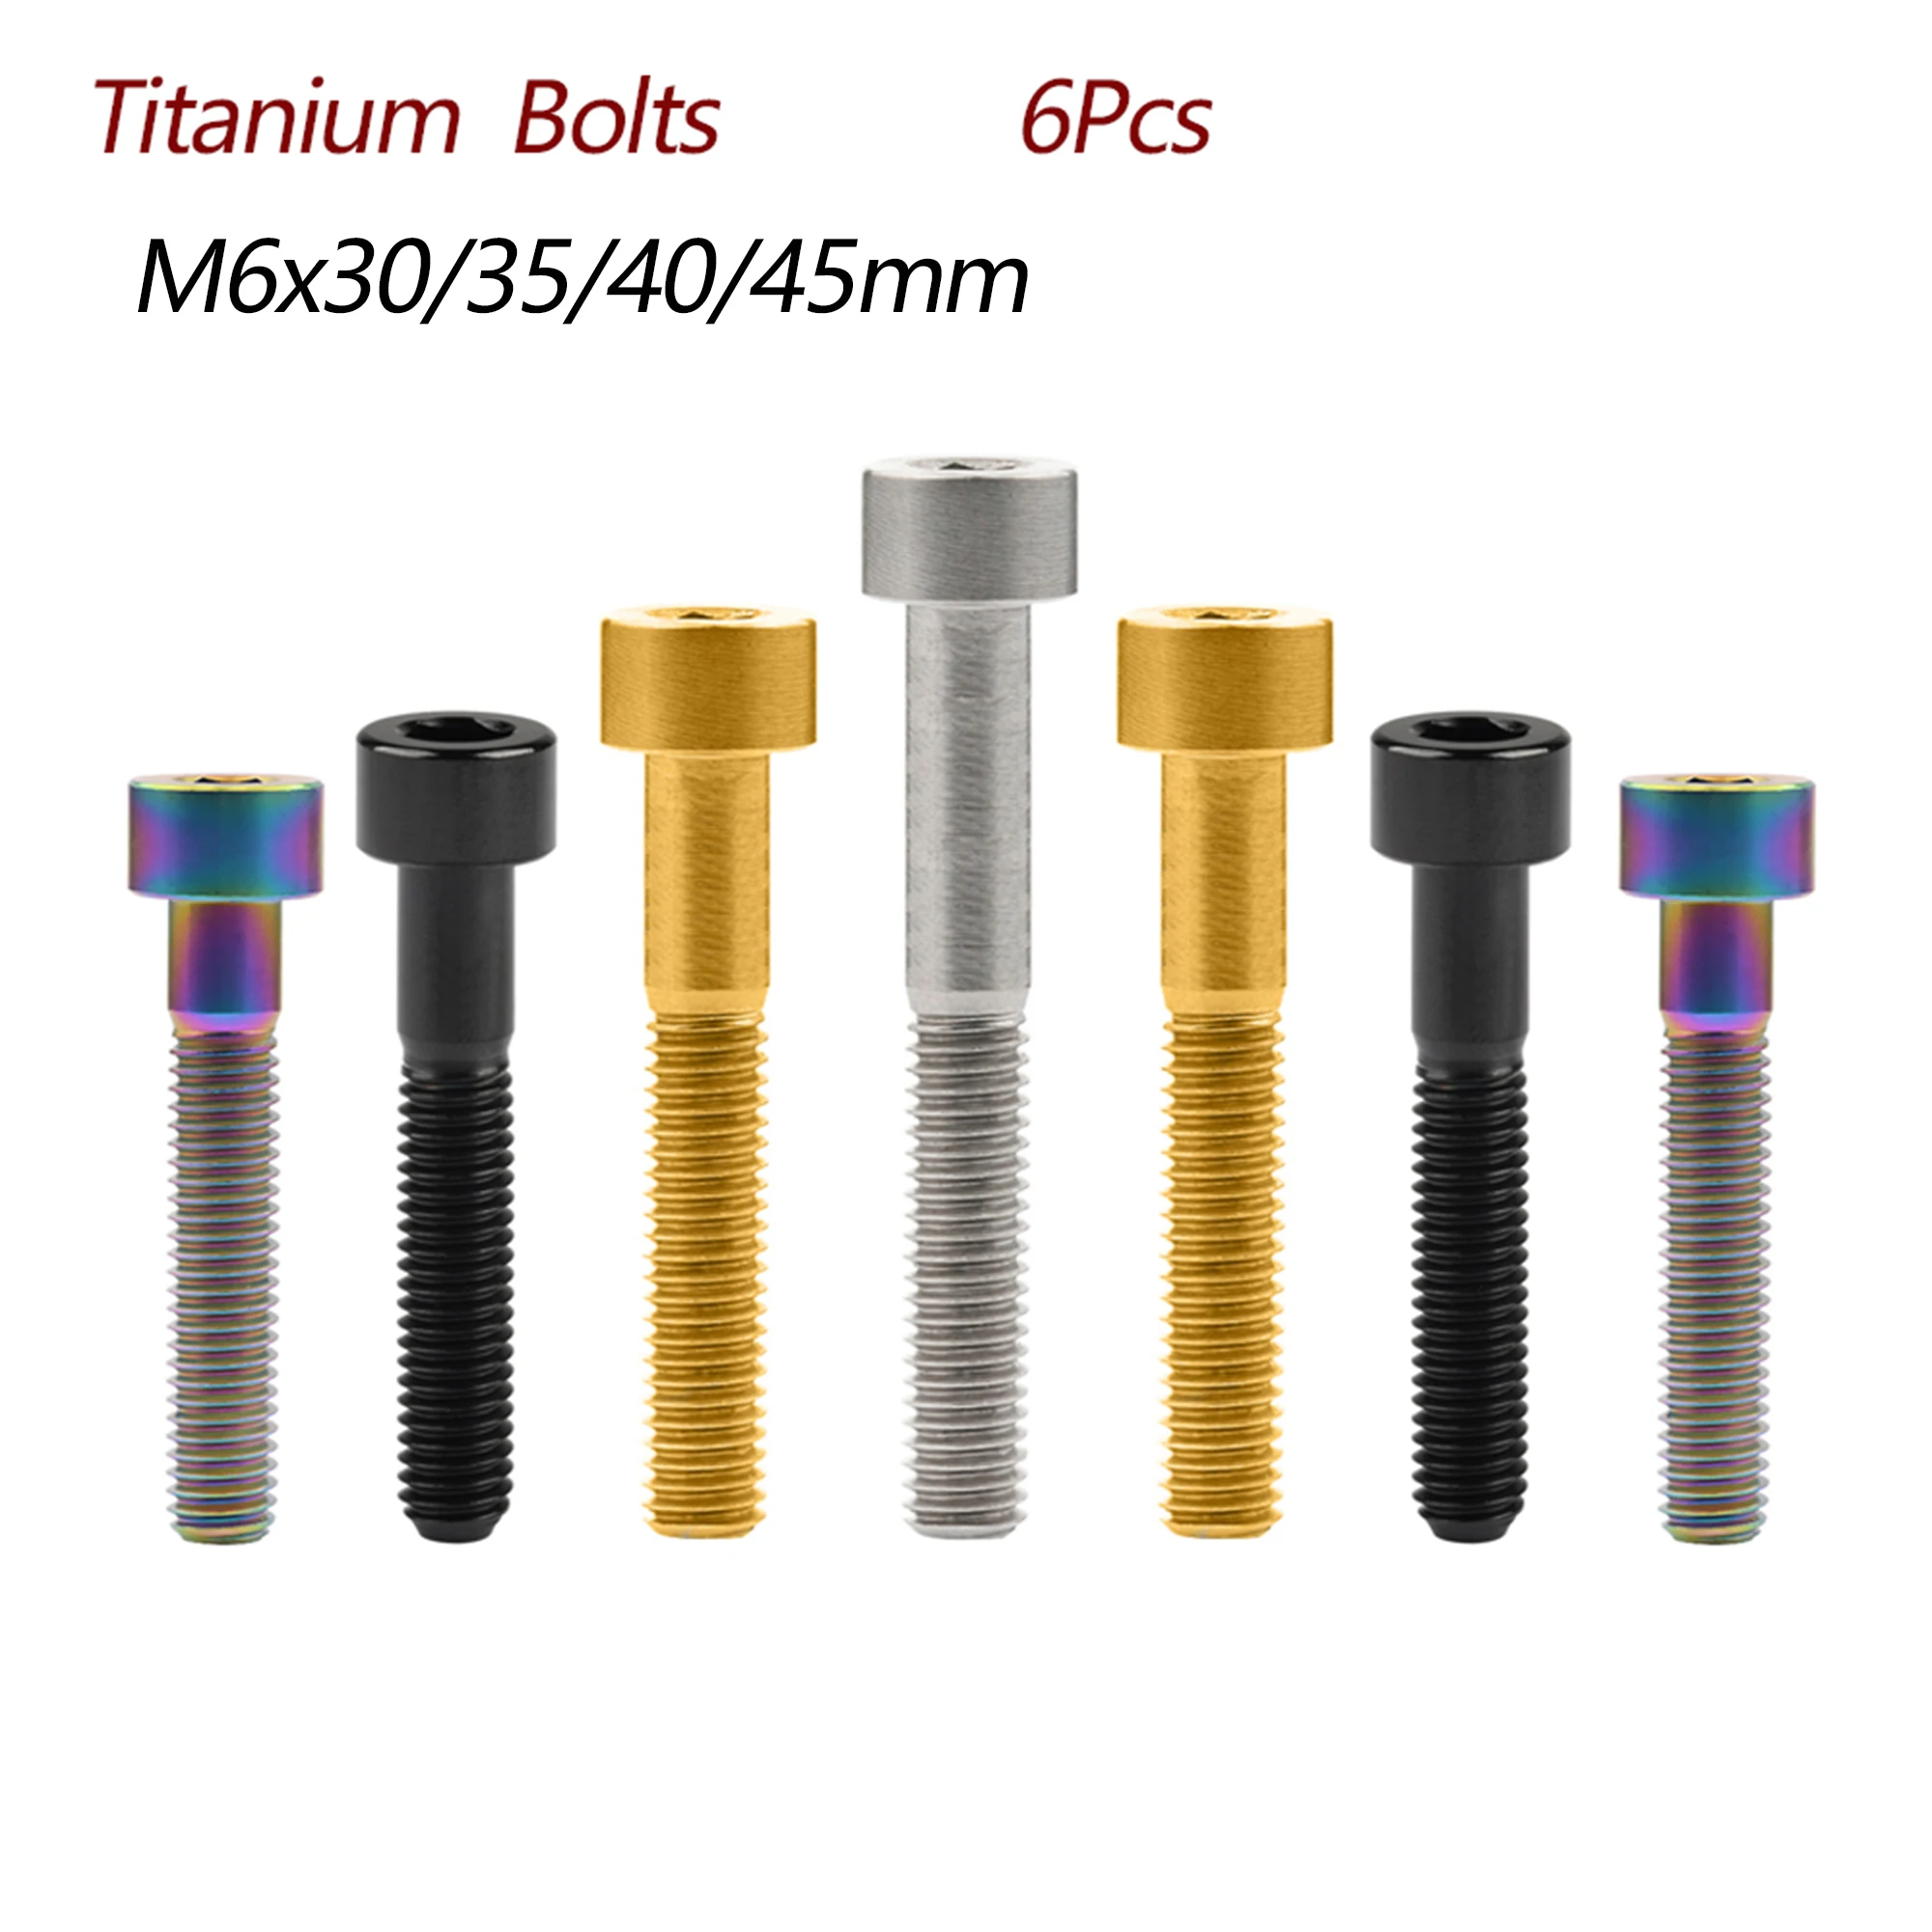 

Wanyifa Titanium Bolts M6x30/35/40/45mm DIN912 Allen Cylindrical Head Screws for MTB or Motorcycle Accessories Fasteners 6Pcs